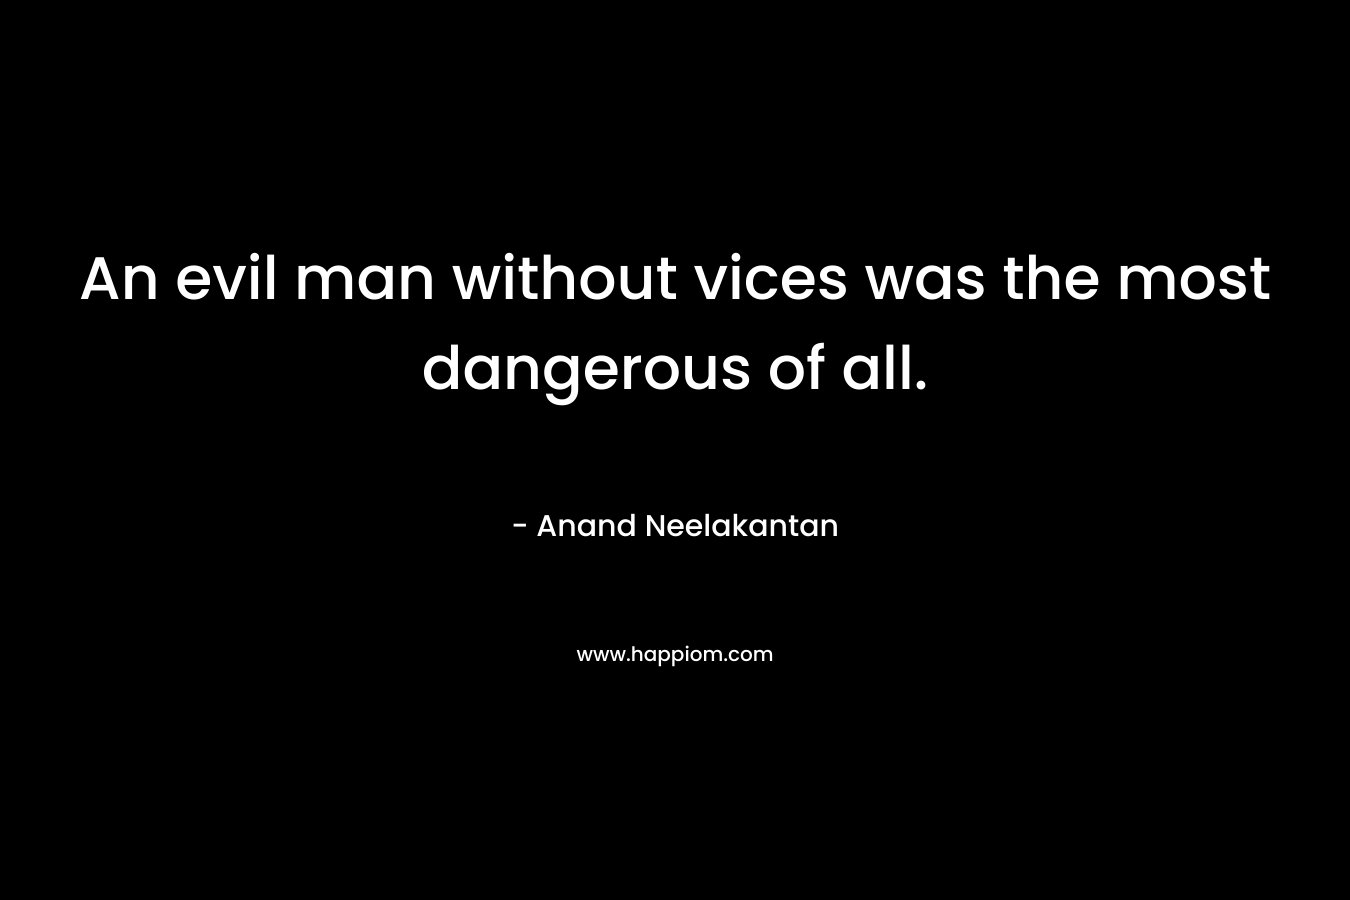 An evil man without vices was the most dangerous of all.